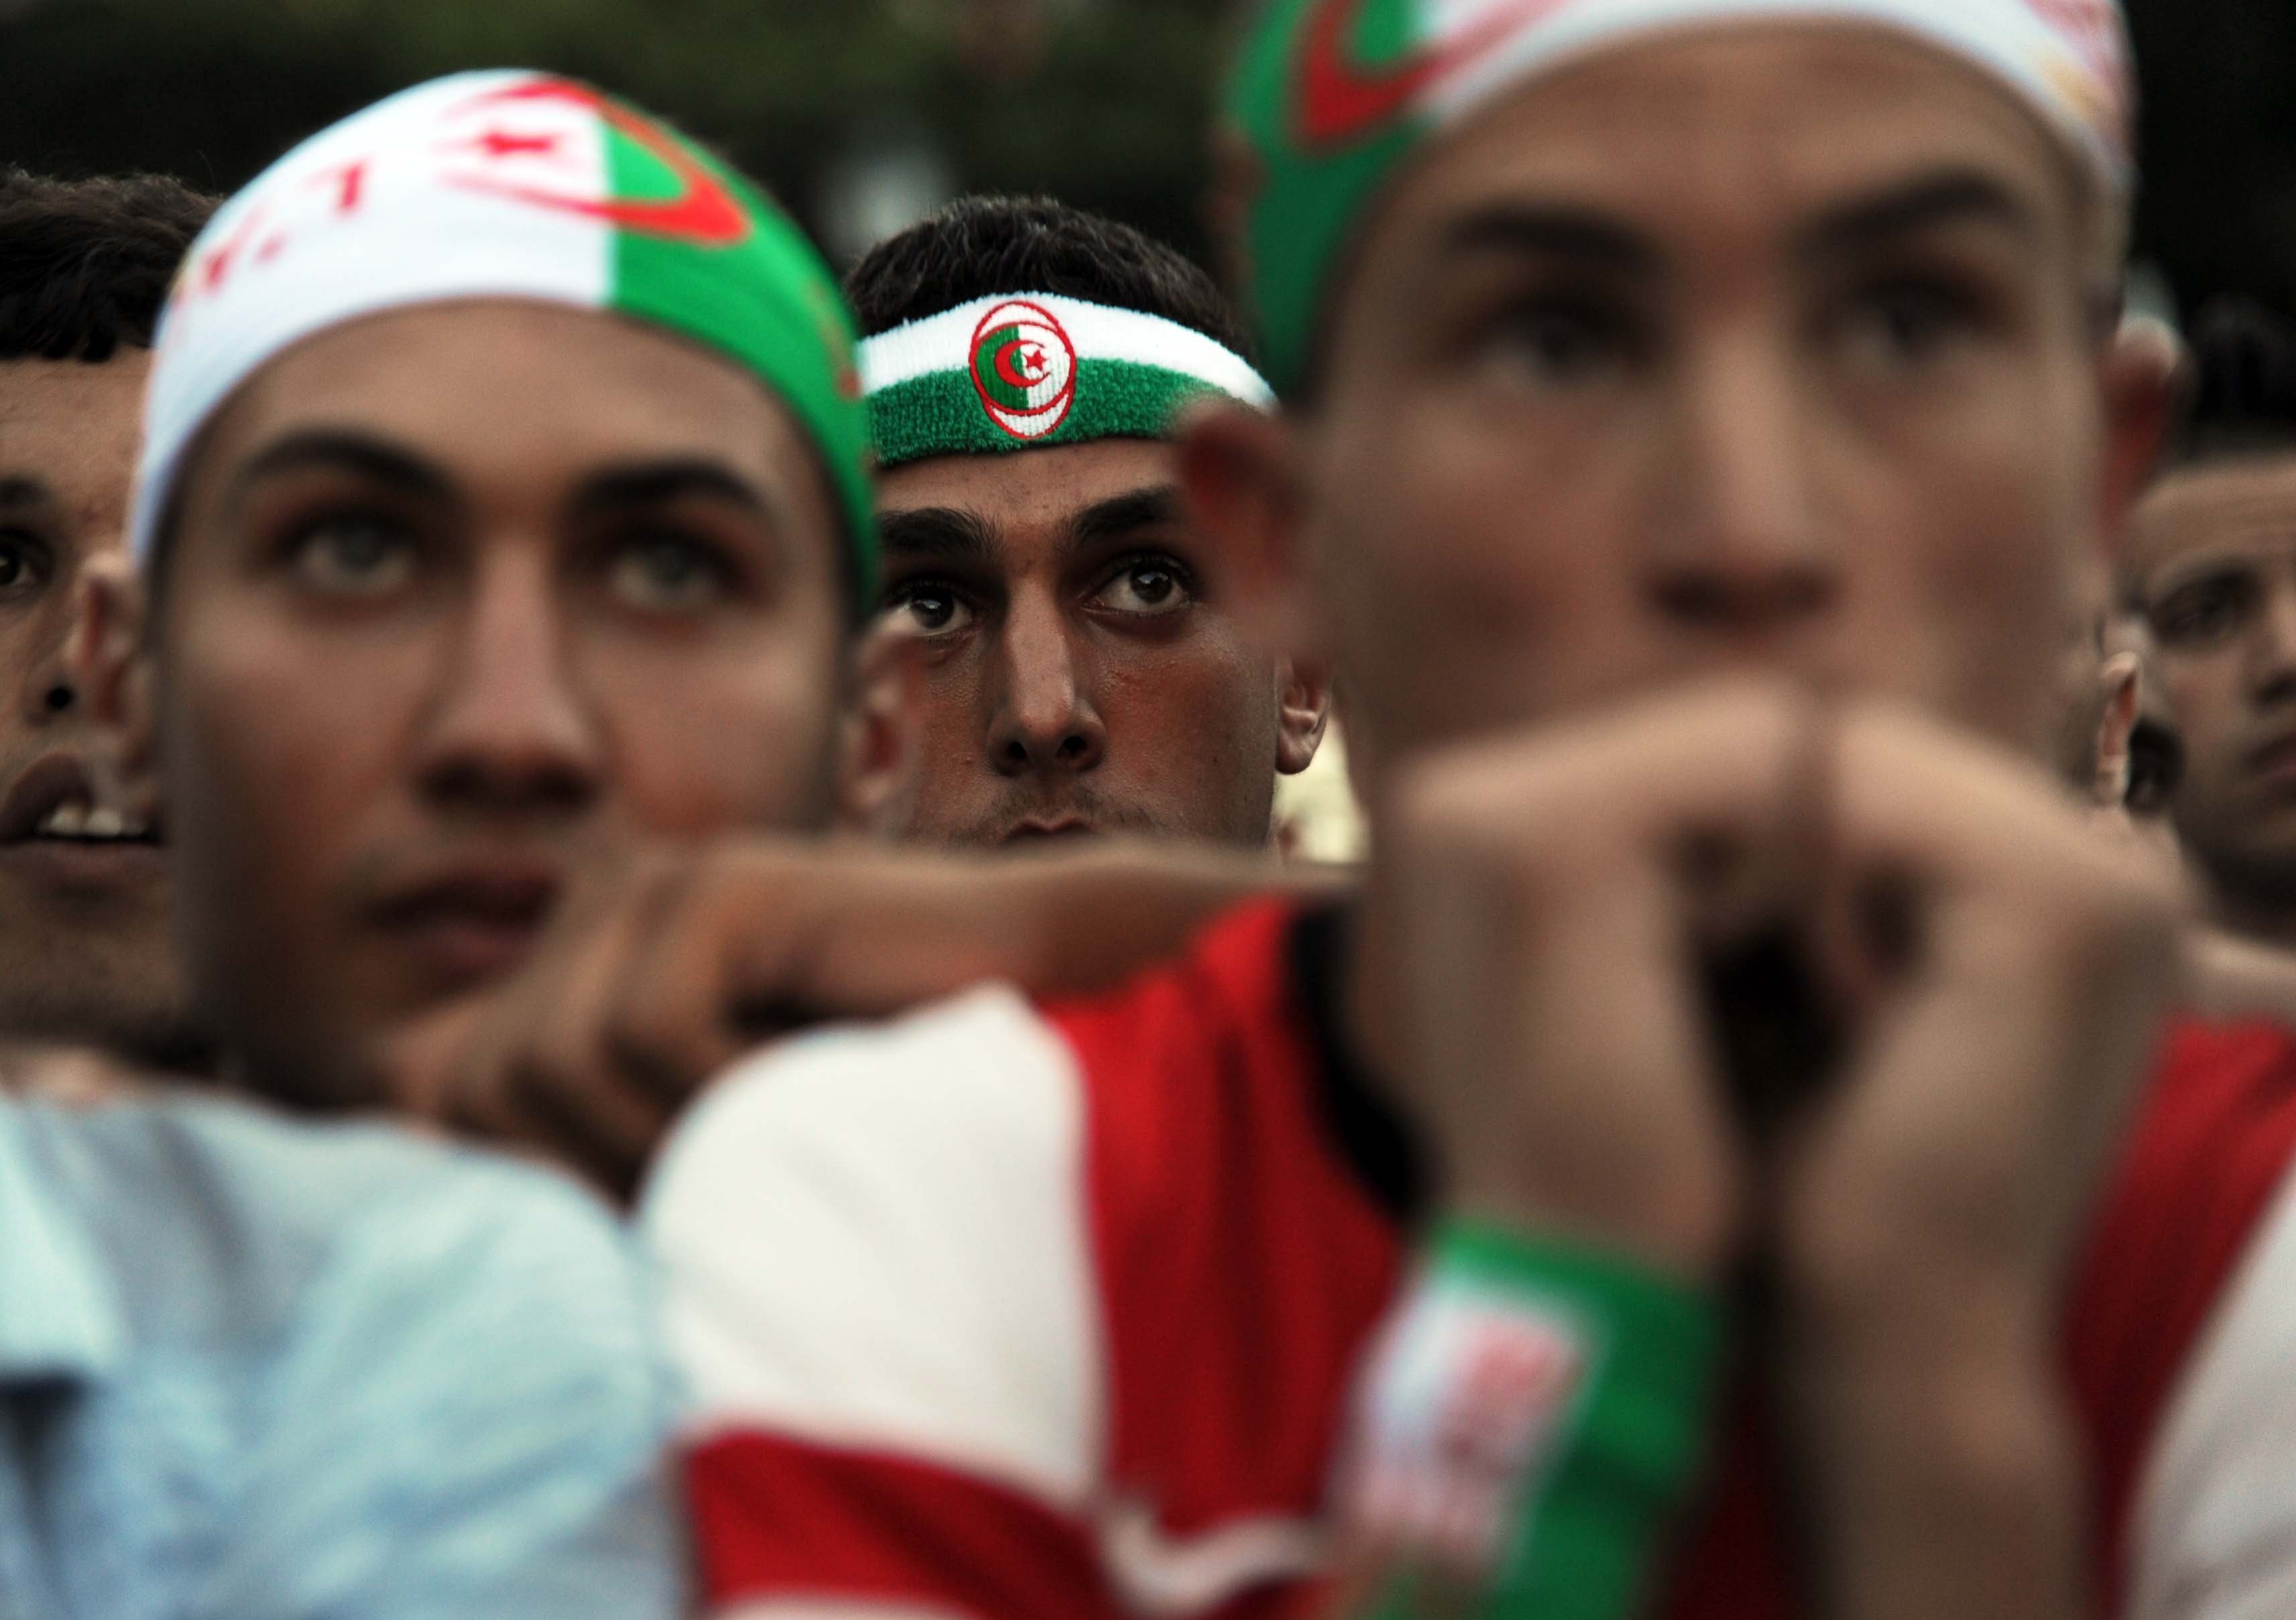 Algeria's fans react as they watch the match between Algeria and South Korea on a big screen in central Algiers, on June 22, 2014.